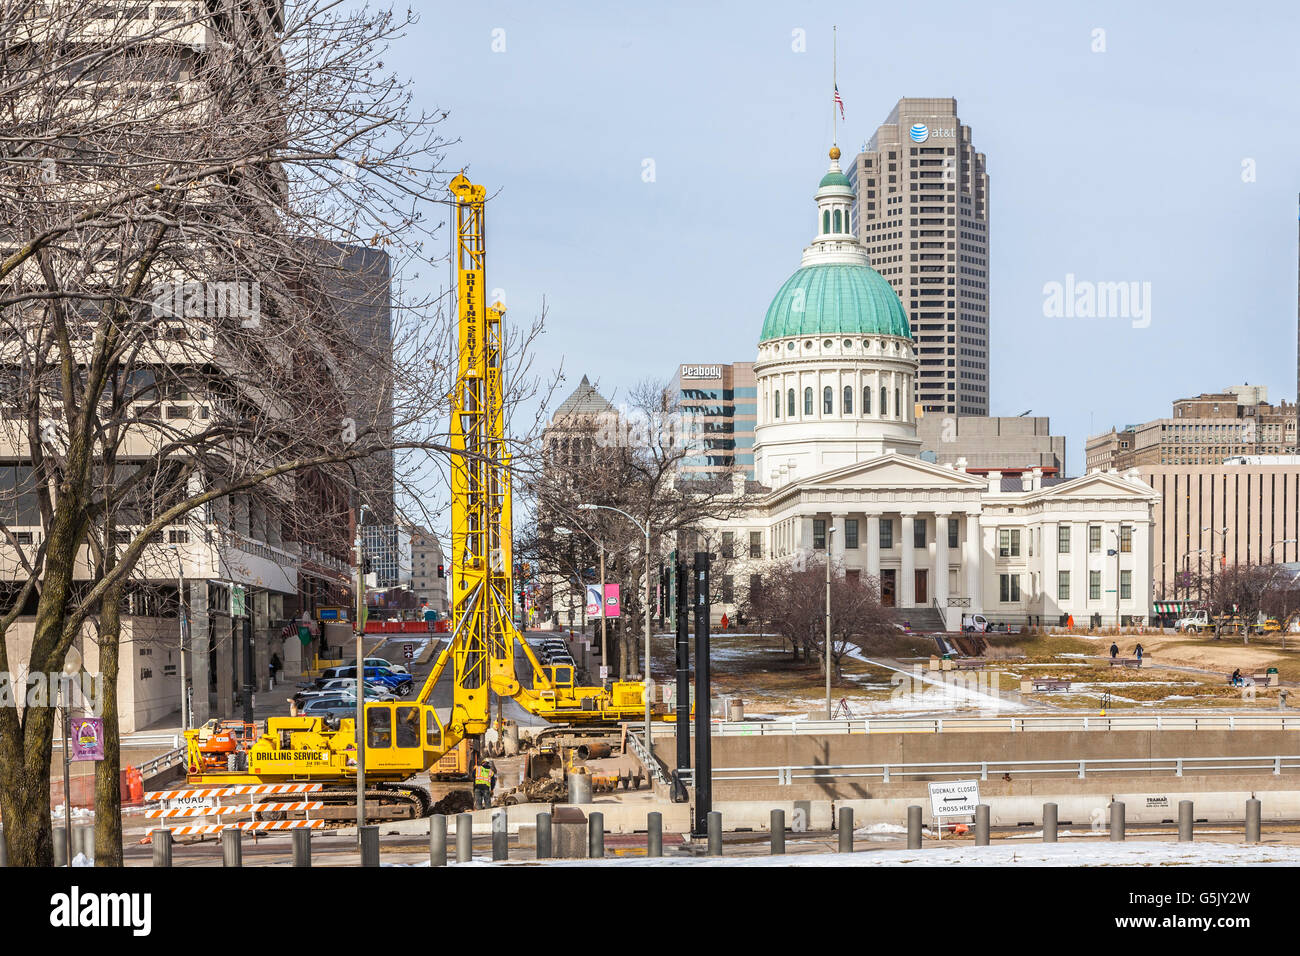 Hole drilling operation as part of road construction near the Old Courthouse in downtown St. Louis, Missouri Stock Photo